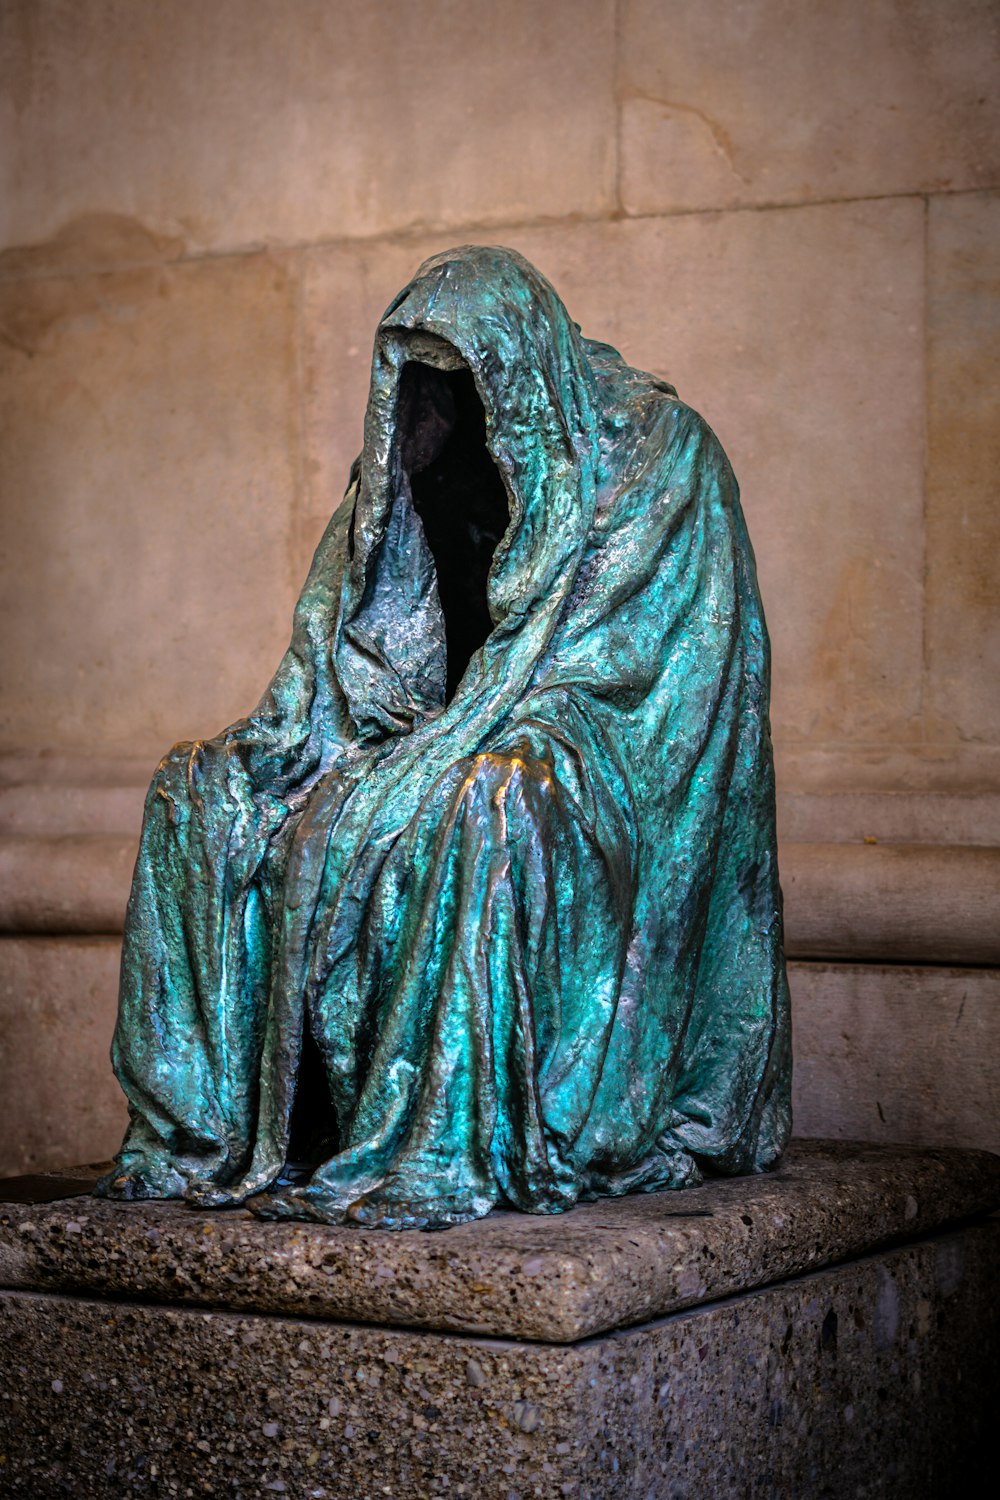 a statue of a person wrapped in a blanket